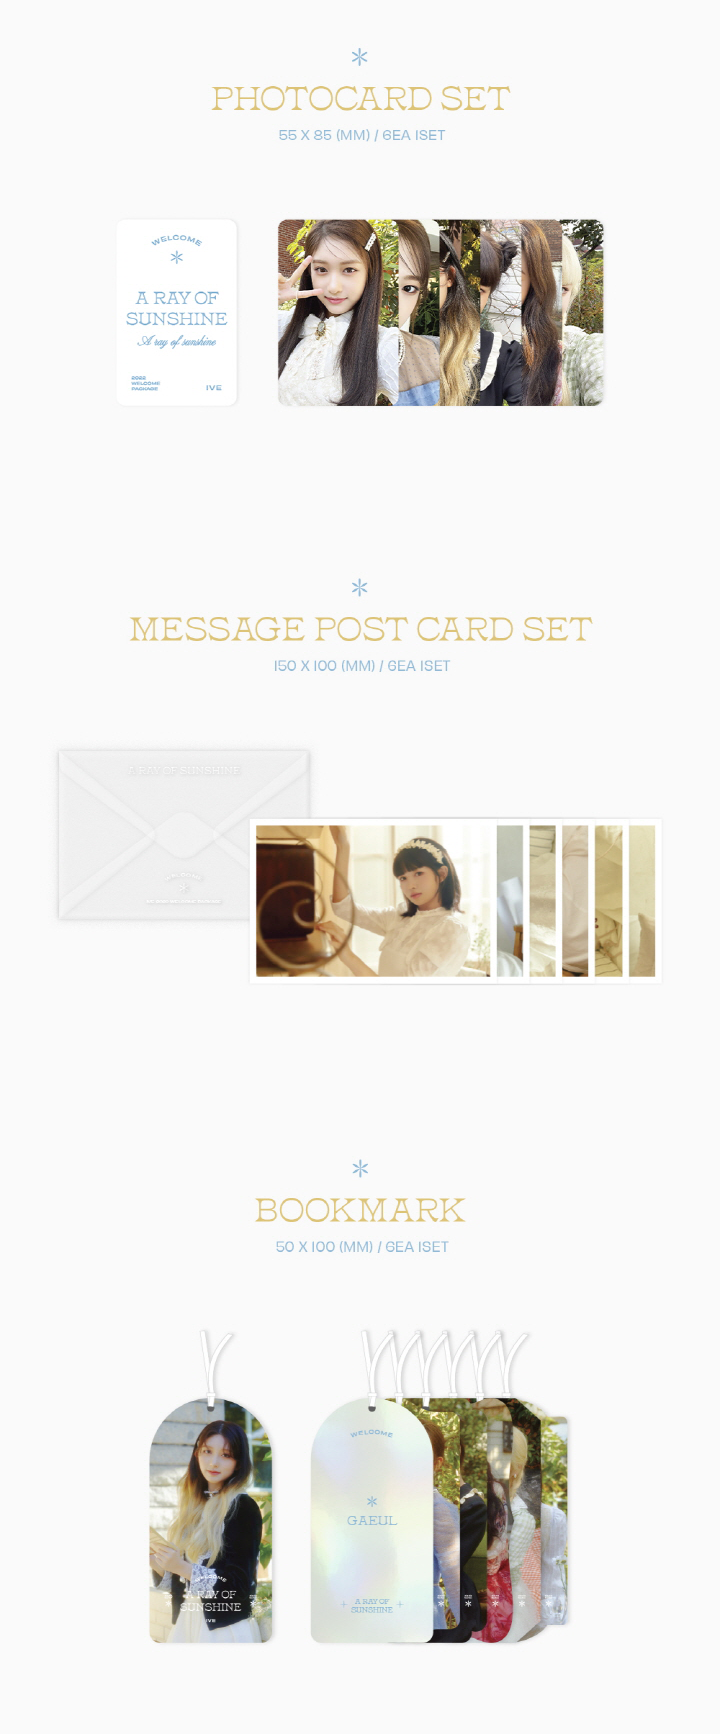 IVE - [A RAY OF SUNSHINE] 2022 WELCOME PACKAGE